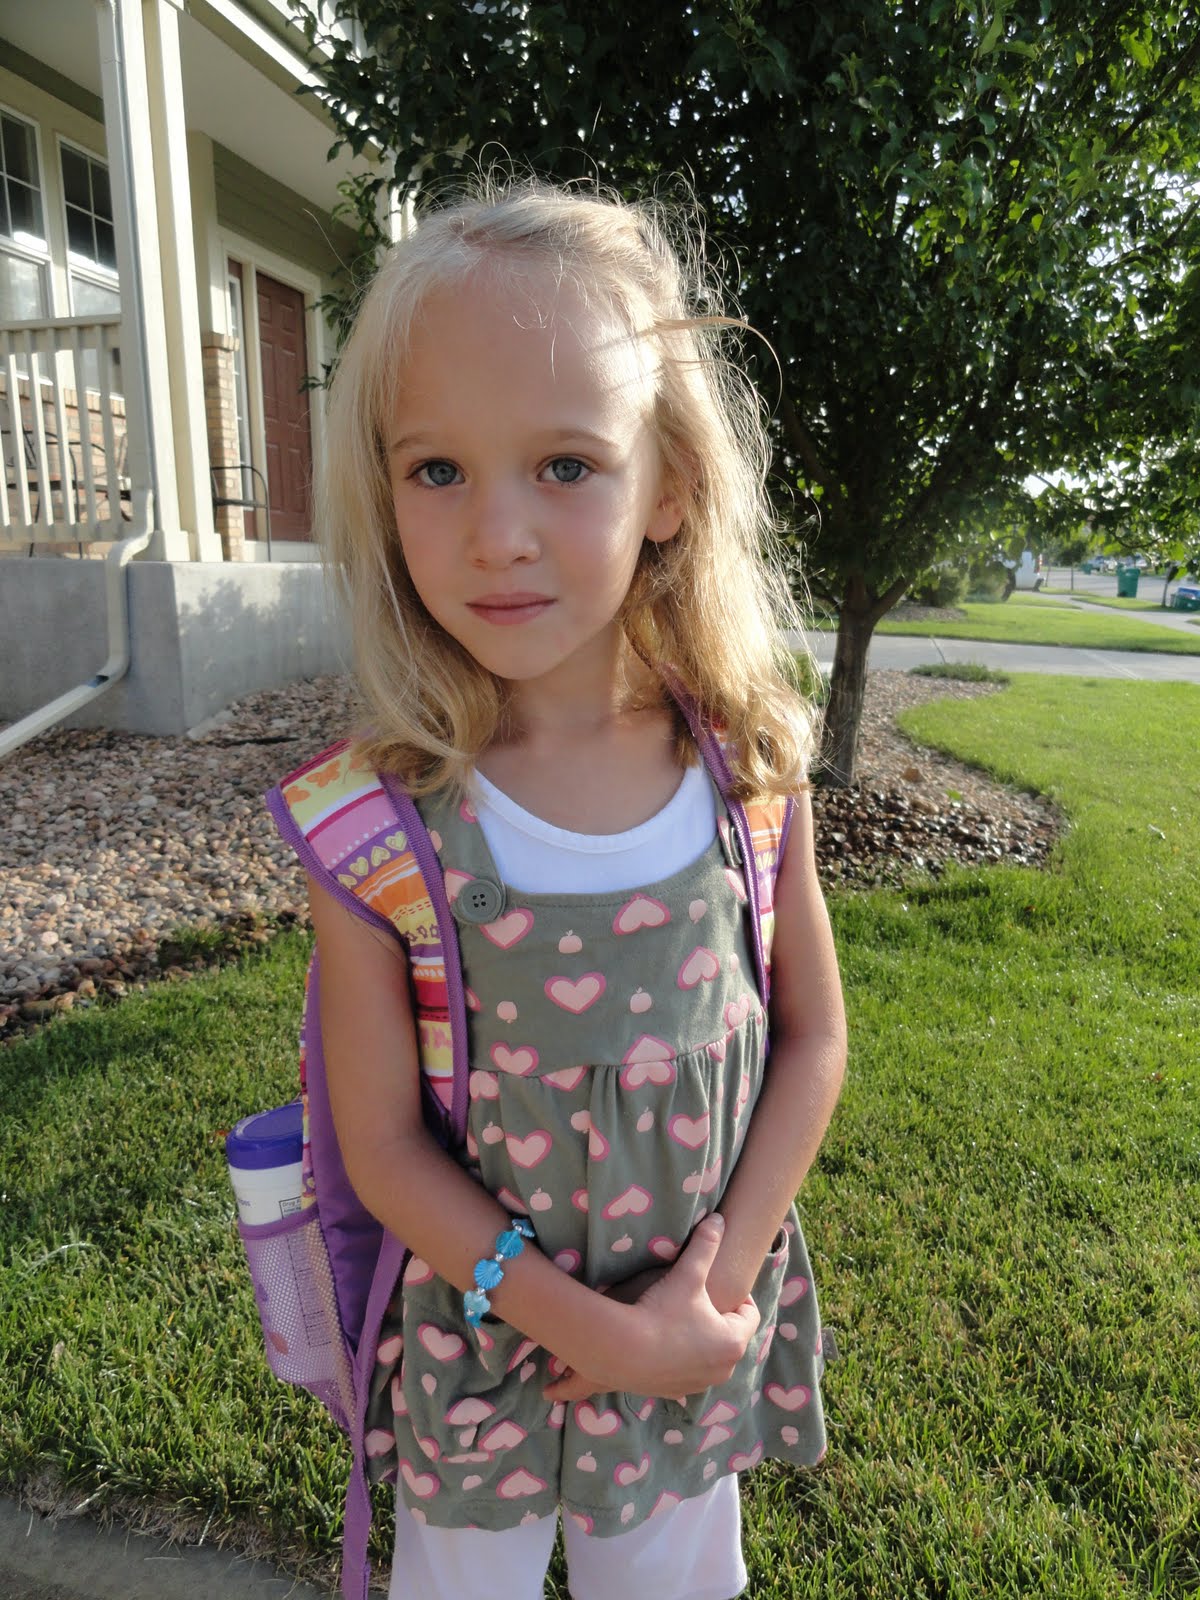 Life in a whirlwind: Our 1st Grader